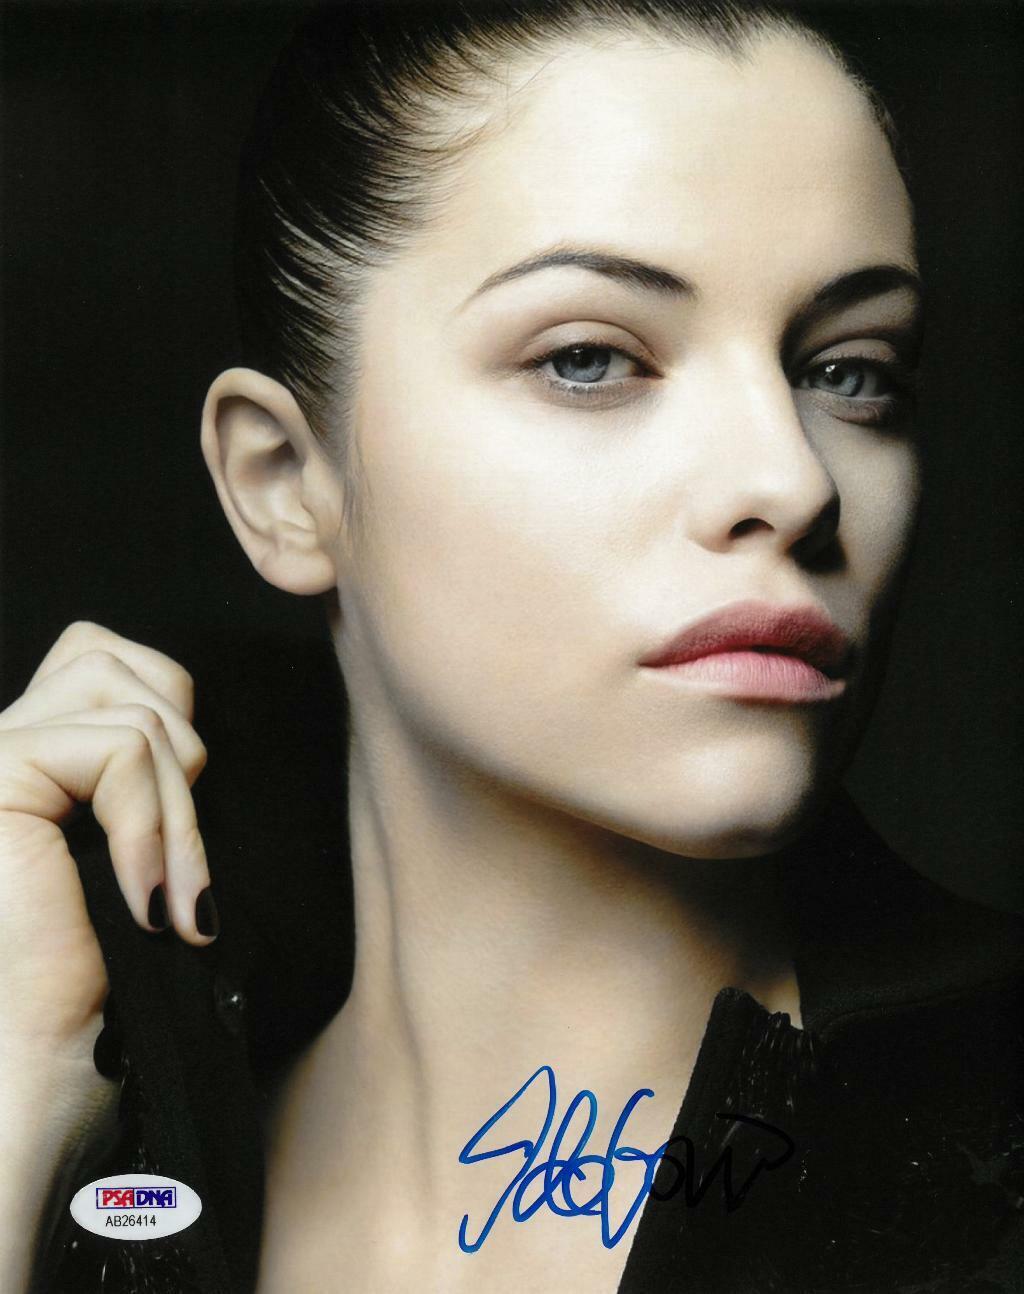 Jessica DeGouw Signed Authentic Autographed 8x10 Photo Poster painting PSA/DNA #AB26414